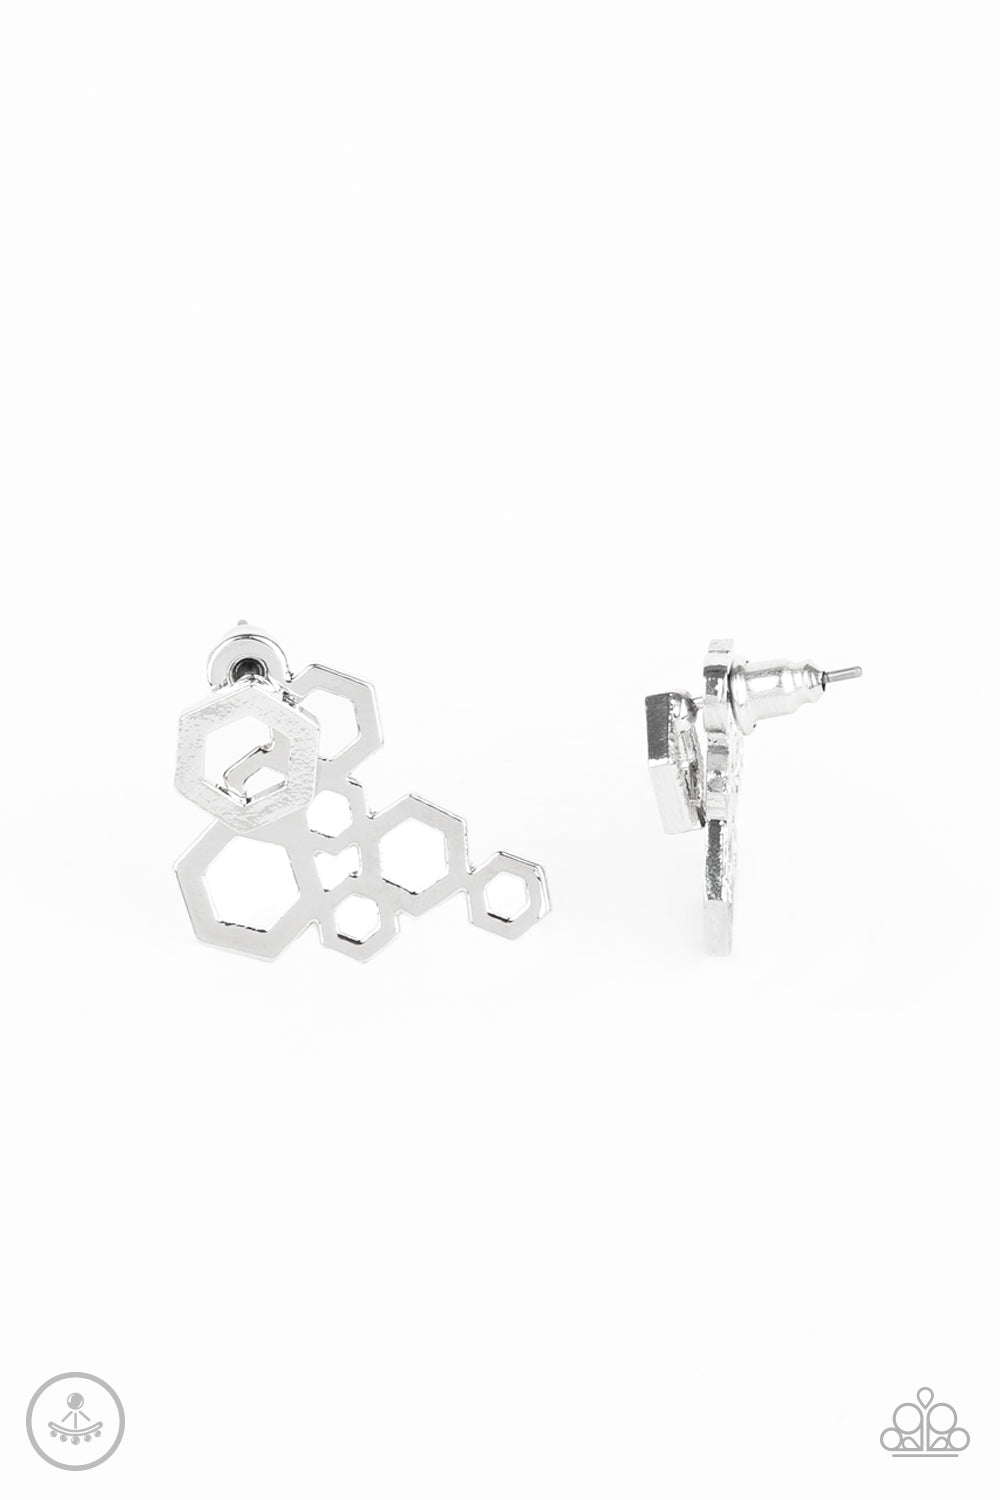 SIX-SIDED SHIMMER - SILVER HEXAGON CLUSTER BUBBLES DOUBLE POST JAKET EARINGS